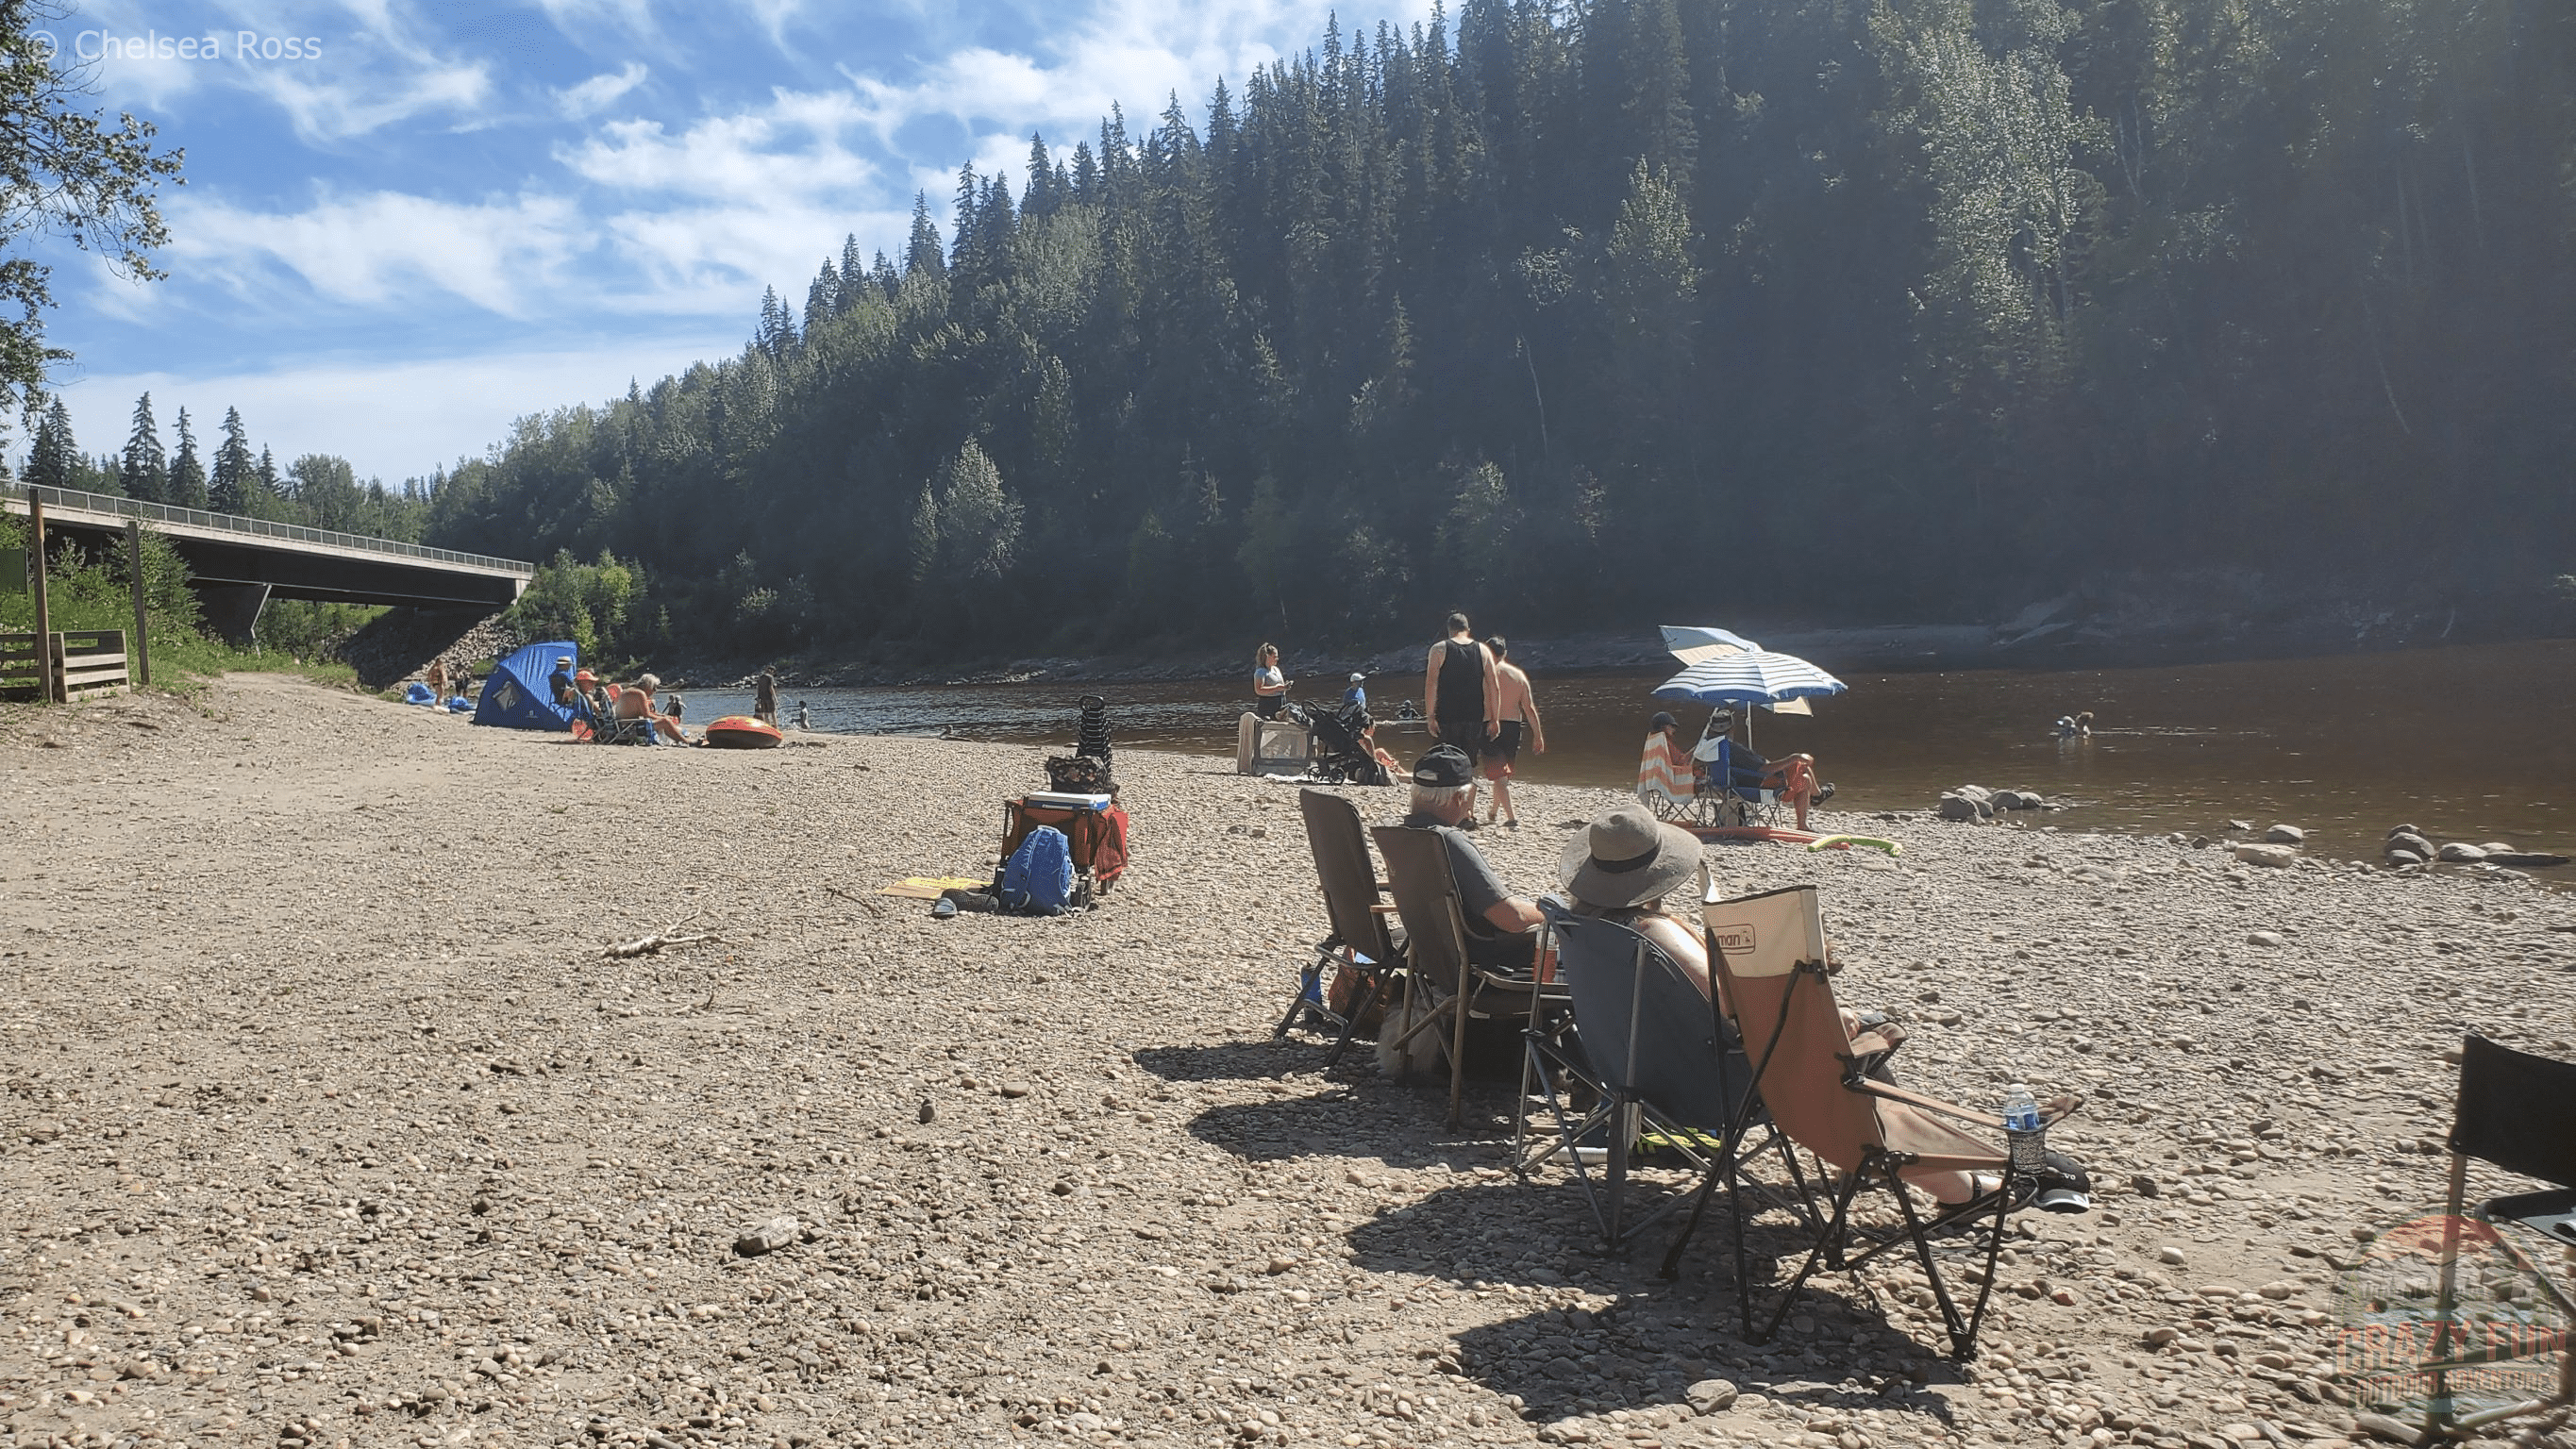 Chairs and people sitting on the rocky beach in front of the water. A bridge is on the left side and trees in the background.